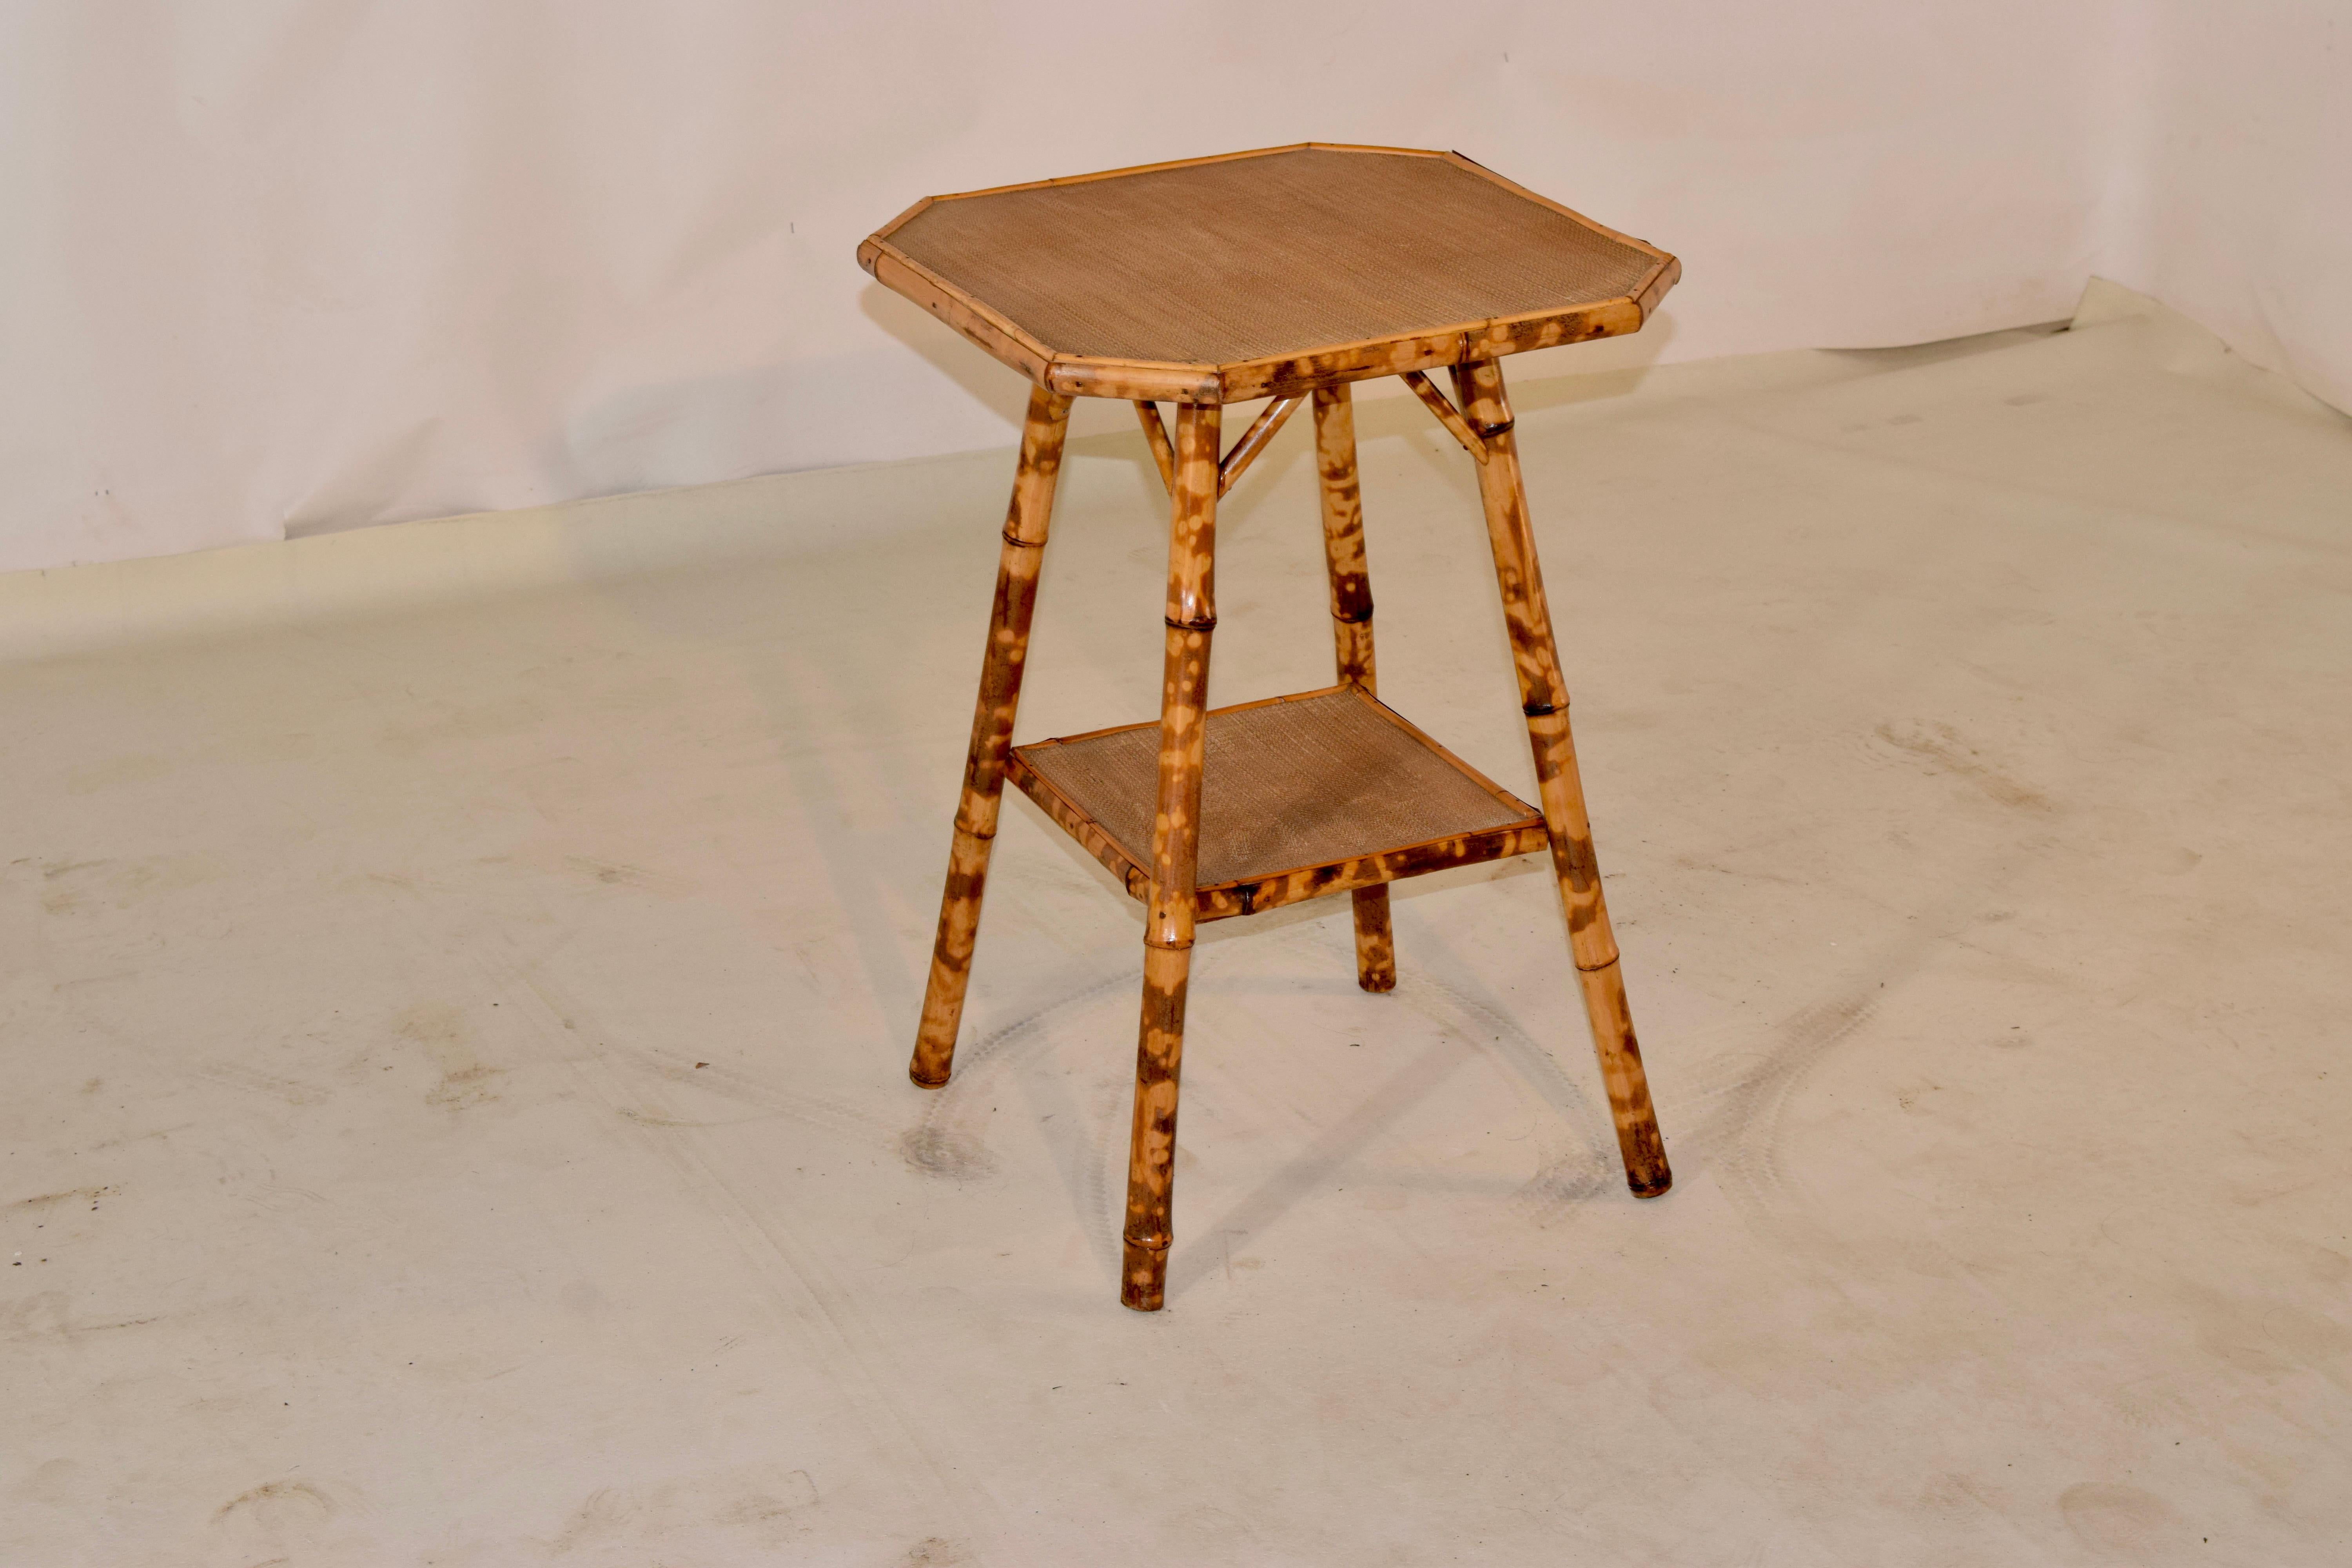 19th century tortoise bamboo side table from France with an octagonal shaped top which is covered in rush. The top is supported on splayed legs, joined by a lower shelf, also covered in rush.